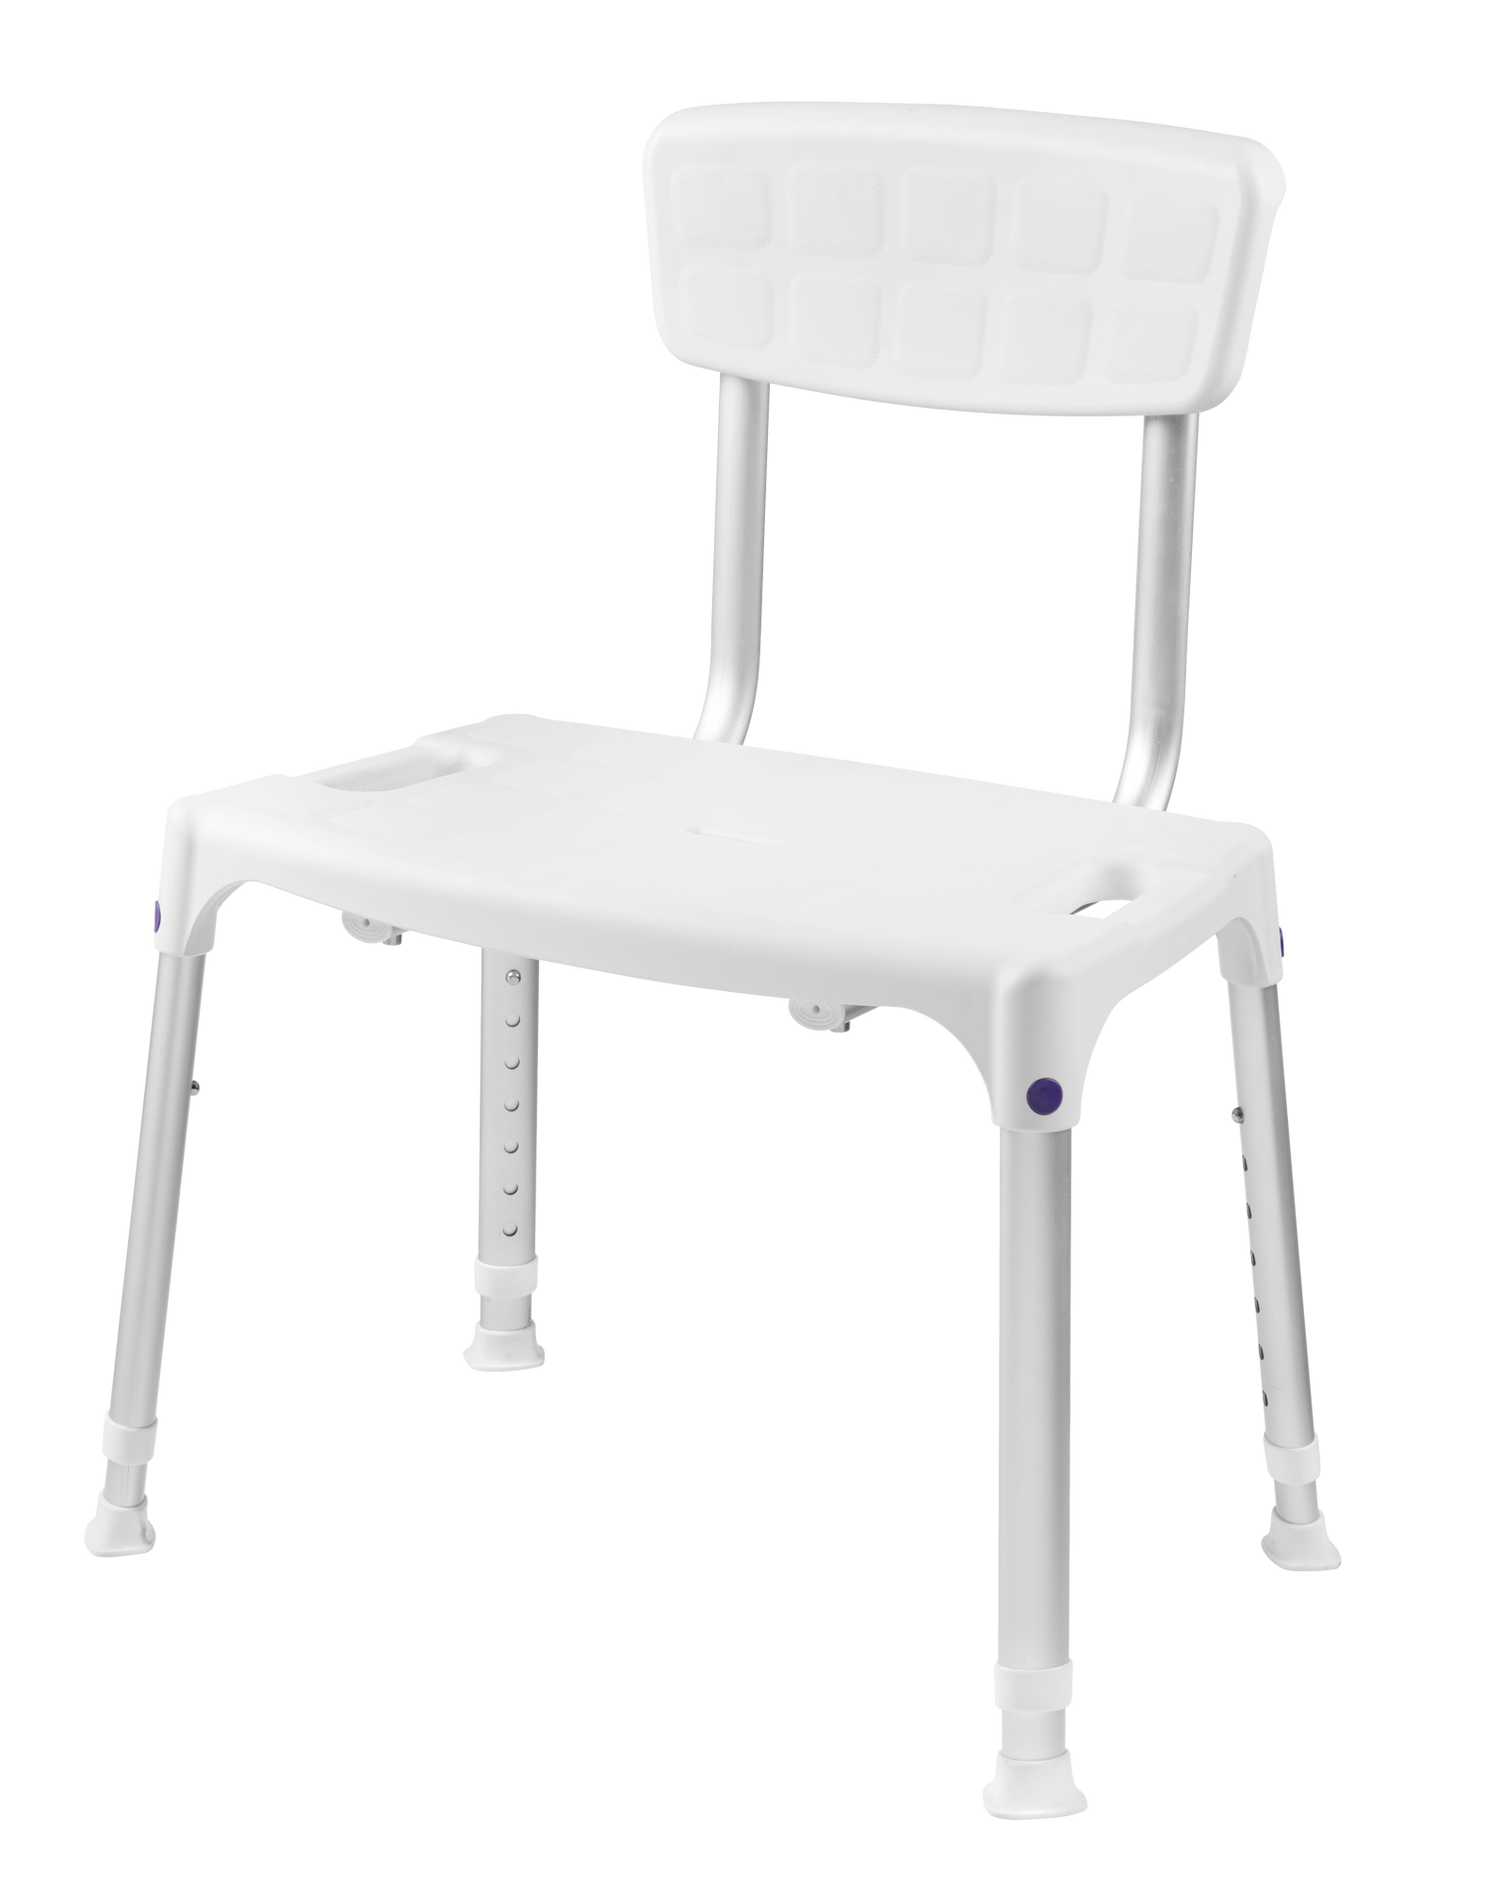 SecuCare Quattro Shower Chair with backrest, white, adjustable height 390-540 mm